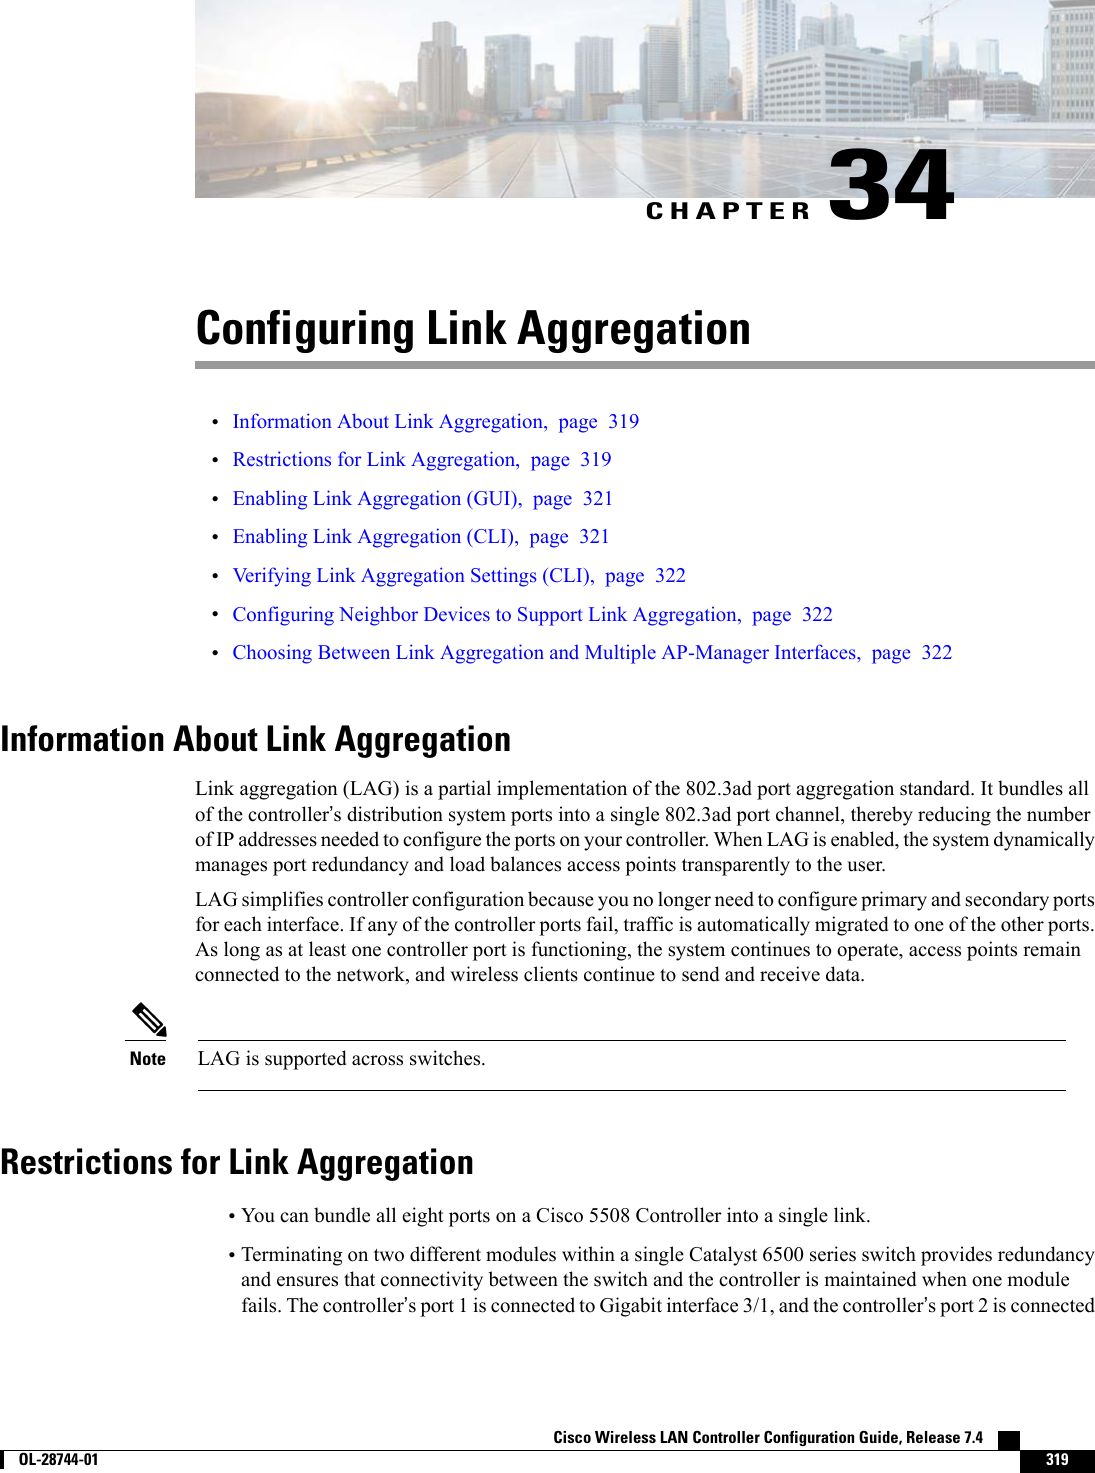 CHAPTER 34Configuring Link Aggregation•Information About Link Aggregation, page 319•Restrictions for Link Aggregation, page 319•Enabling Link Aggregation (GUI), page 321•Enabling Link Aggregation (CLI), page 321•Verifying Link Aggregation Settings (CLI), page 322•Configuring Neighbor Devices to Support Link Aggregation, page 322•Choosing Between Link Aggregation and Multiple AP-Manager Interfaces, page 322Information About Link AggregationLink aggregation (LAG) is a partial implementation of the 802.3ad port aggregation standard. It bundles allof the controller’s distribution system ports into a single 802.3ad port channel, thereby reducing the numberof IP addresses needed to configure the ports on your controller. When LAG is enabled, the system dynamicallymanages port redundancy and load balances access points transparently to the user.LAG simplifies controller configuration because you no longer need to configure primary and secondary portsfor each interface. If any of the controller ports fail, traffic is automatically migrated to one of the other ports.As long as at least one controller port is functioning, the system continues to operate, access points remainconnected to the network, and wireless clients continue to send and receive data.LAG is supported across switches.NoteRestrictions for Link Aggregation•You can bundle all eight ports on a Cisco 5508 Controller into a single link.•Terminating on two different modules within a single Catalyst 6500 series switch provides redundancyand ensures that connectivity between the switch and the controller is maintained when one modulefails. The controller’s port 1 is connected to Gigabit interface 3/1, and the controller’s port 2 is connectedCisco Wireless LAN Controller Configuration Guide, Release 7.4        OL-28744-01 319